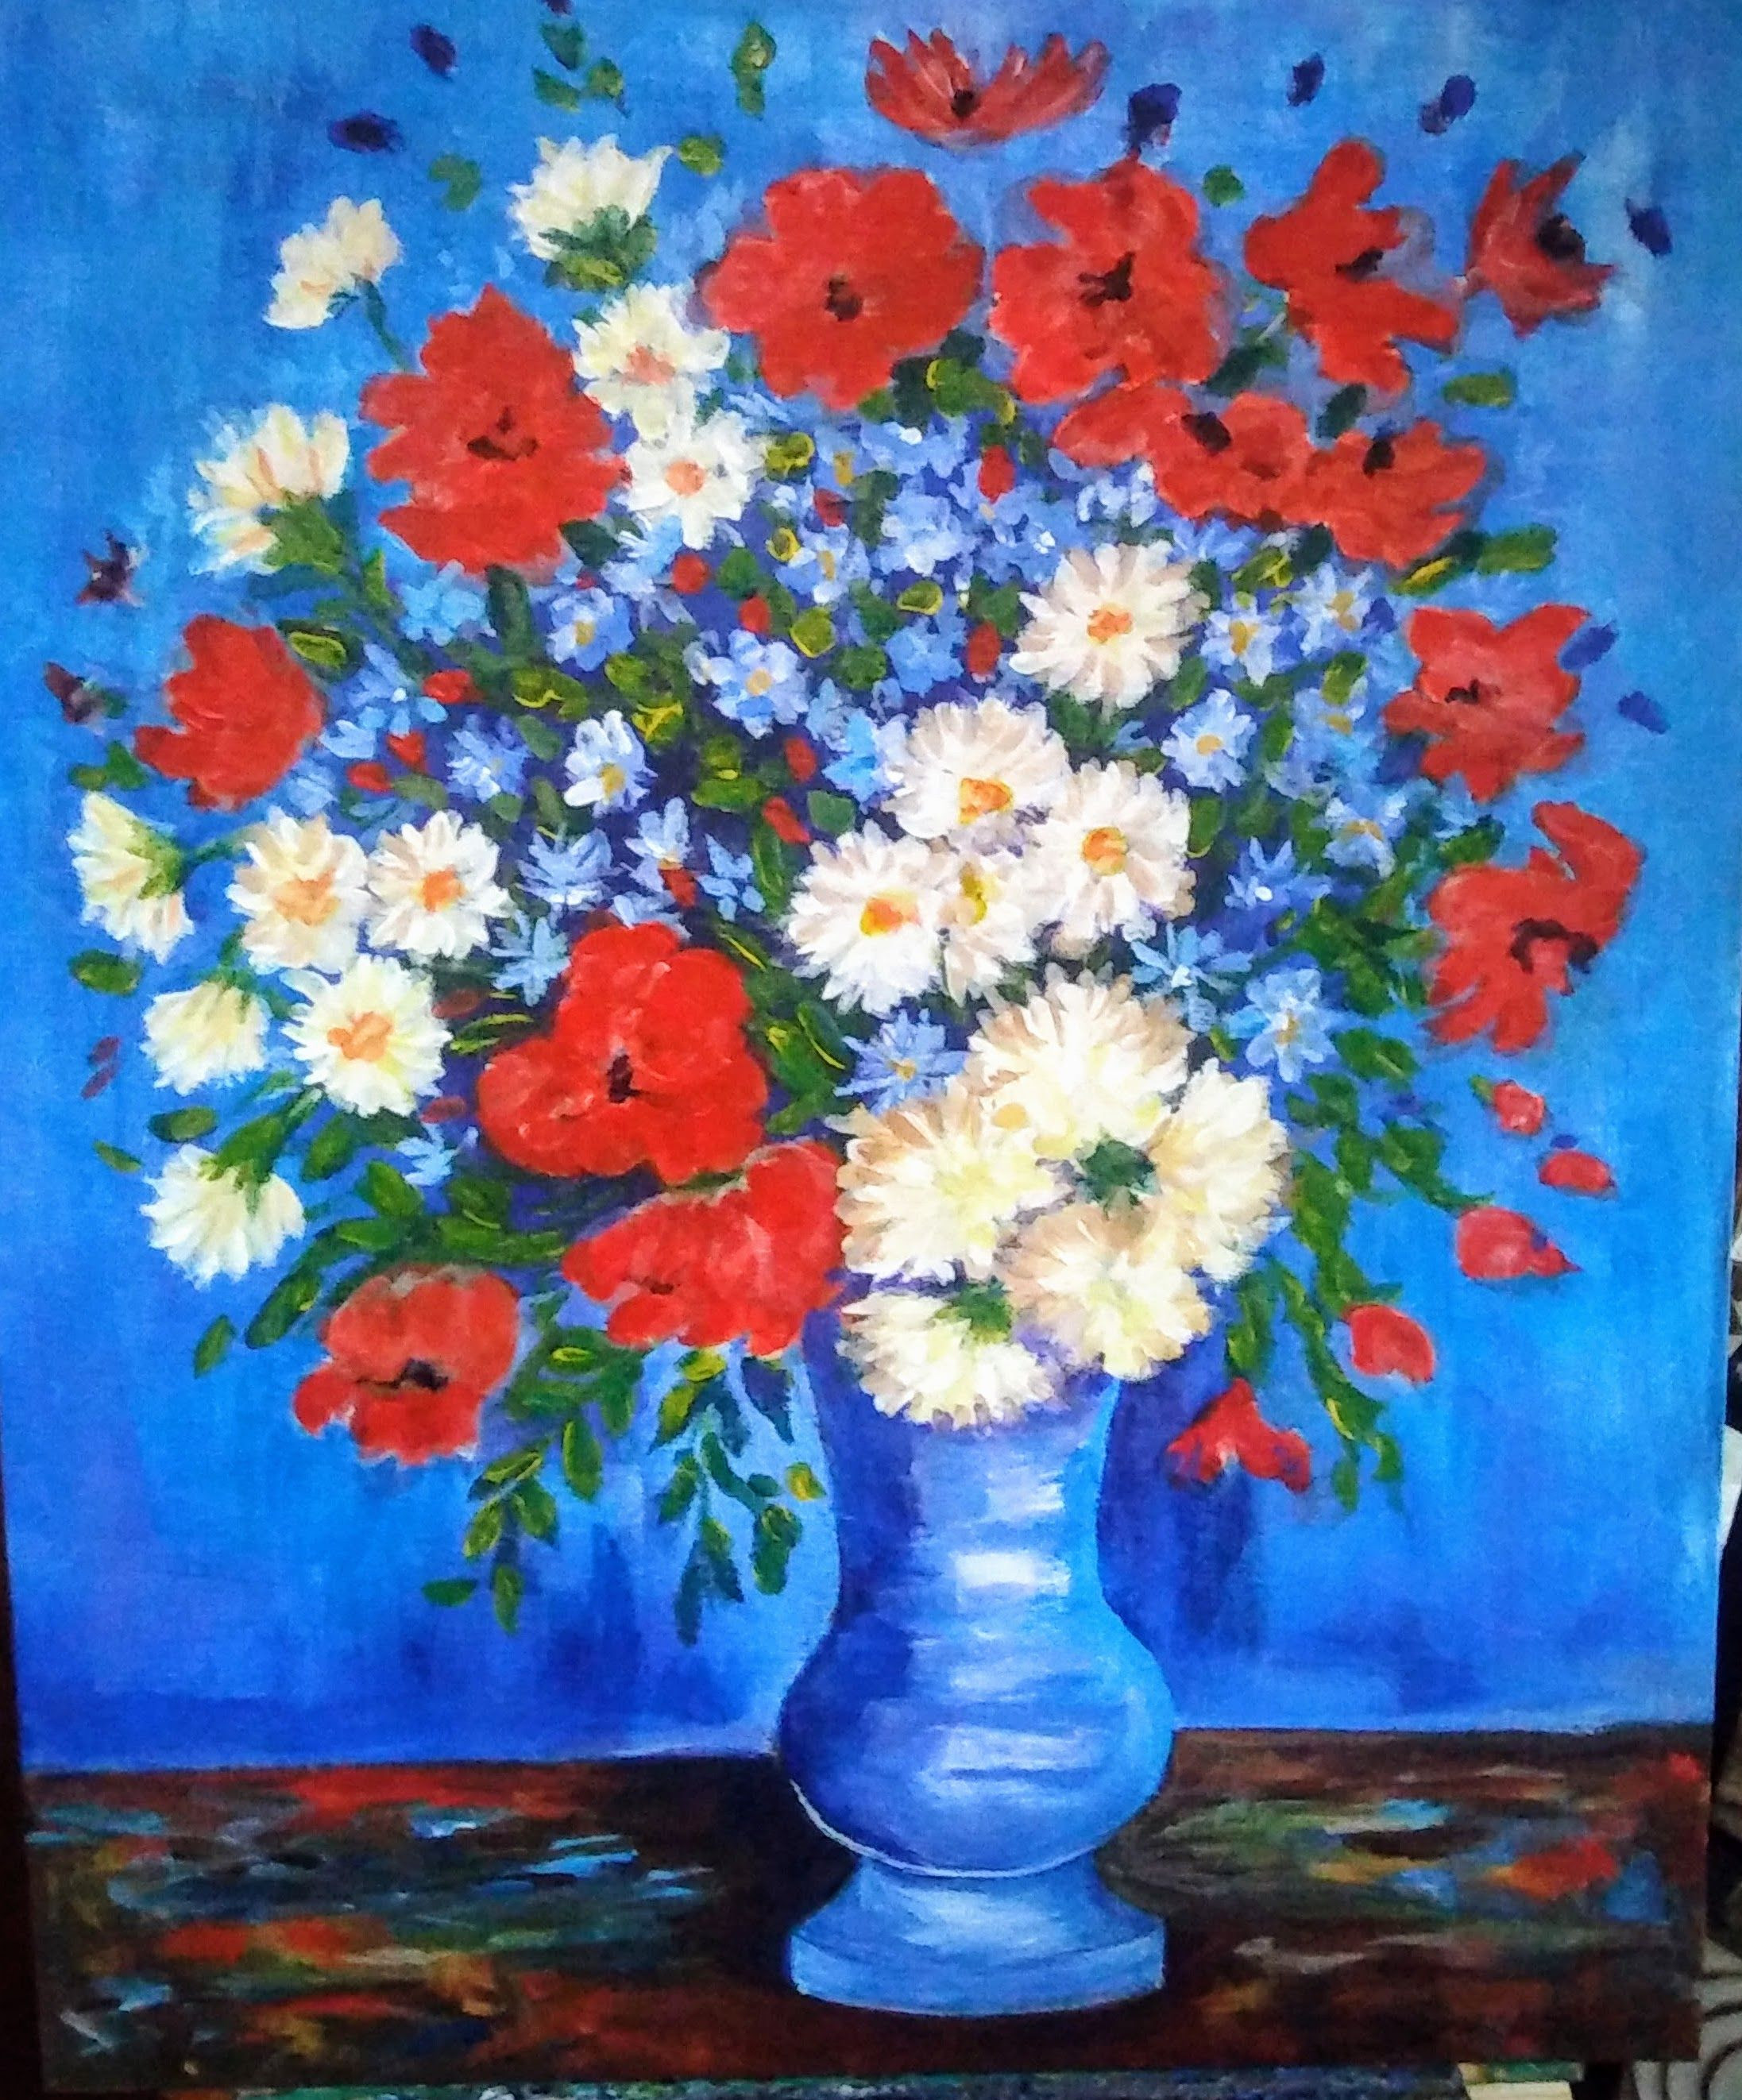 26 Amazing Vincent Van Gogh Vase with Cornflowers and Poppies 2024 free download vincent van gogh vase with cornflowers and poppies of van gogh corn flowers was painted by christine gerst from one of with van gogh corn flowers was painted by christine gerst from one of o